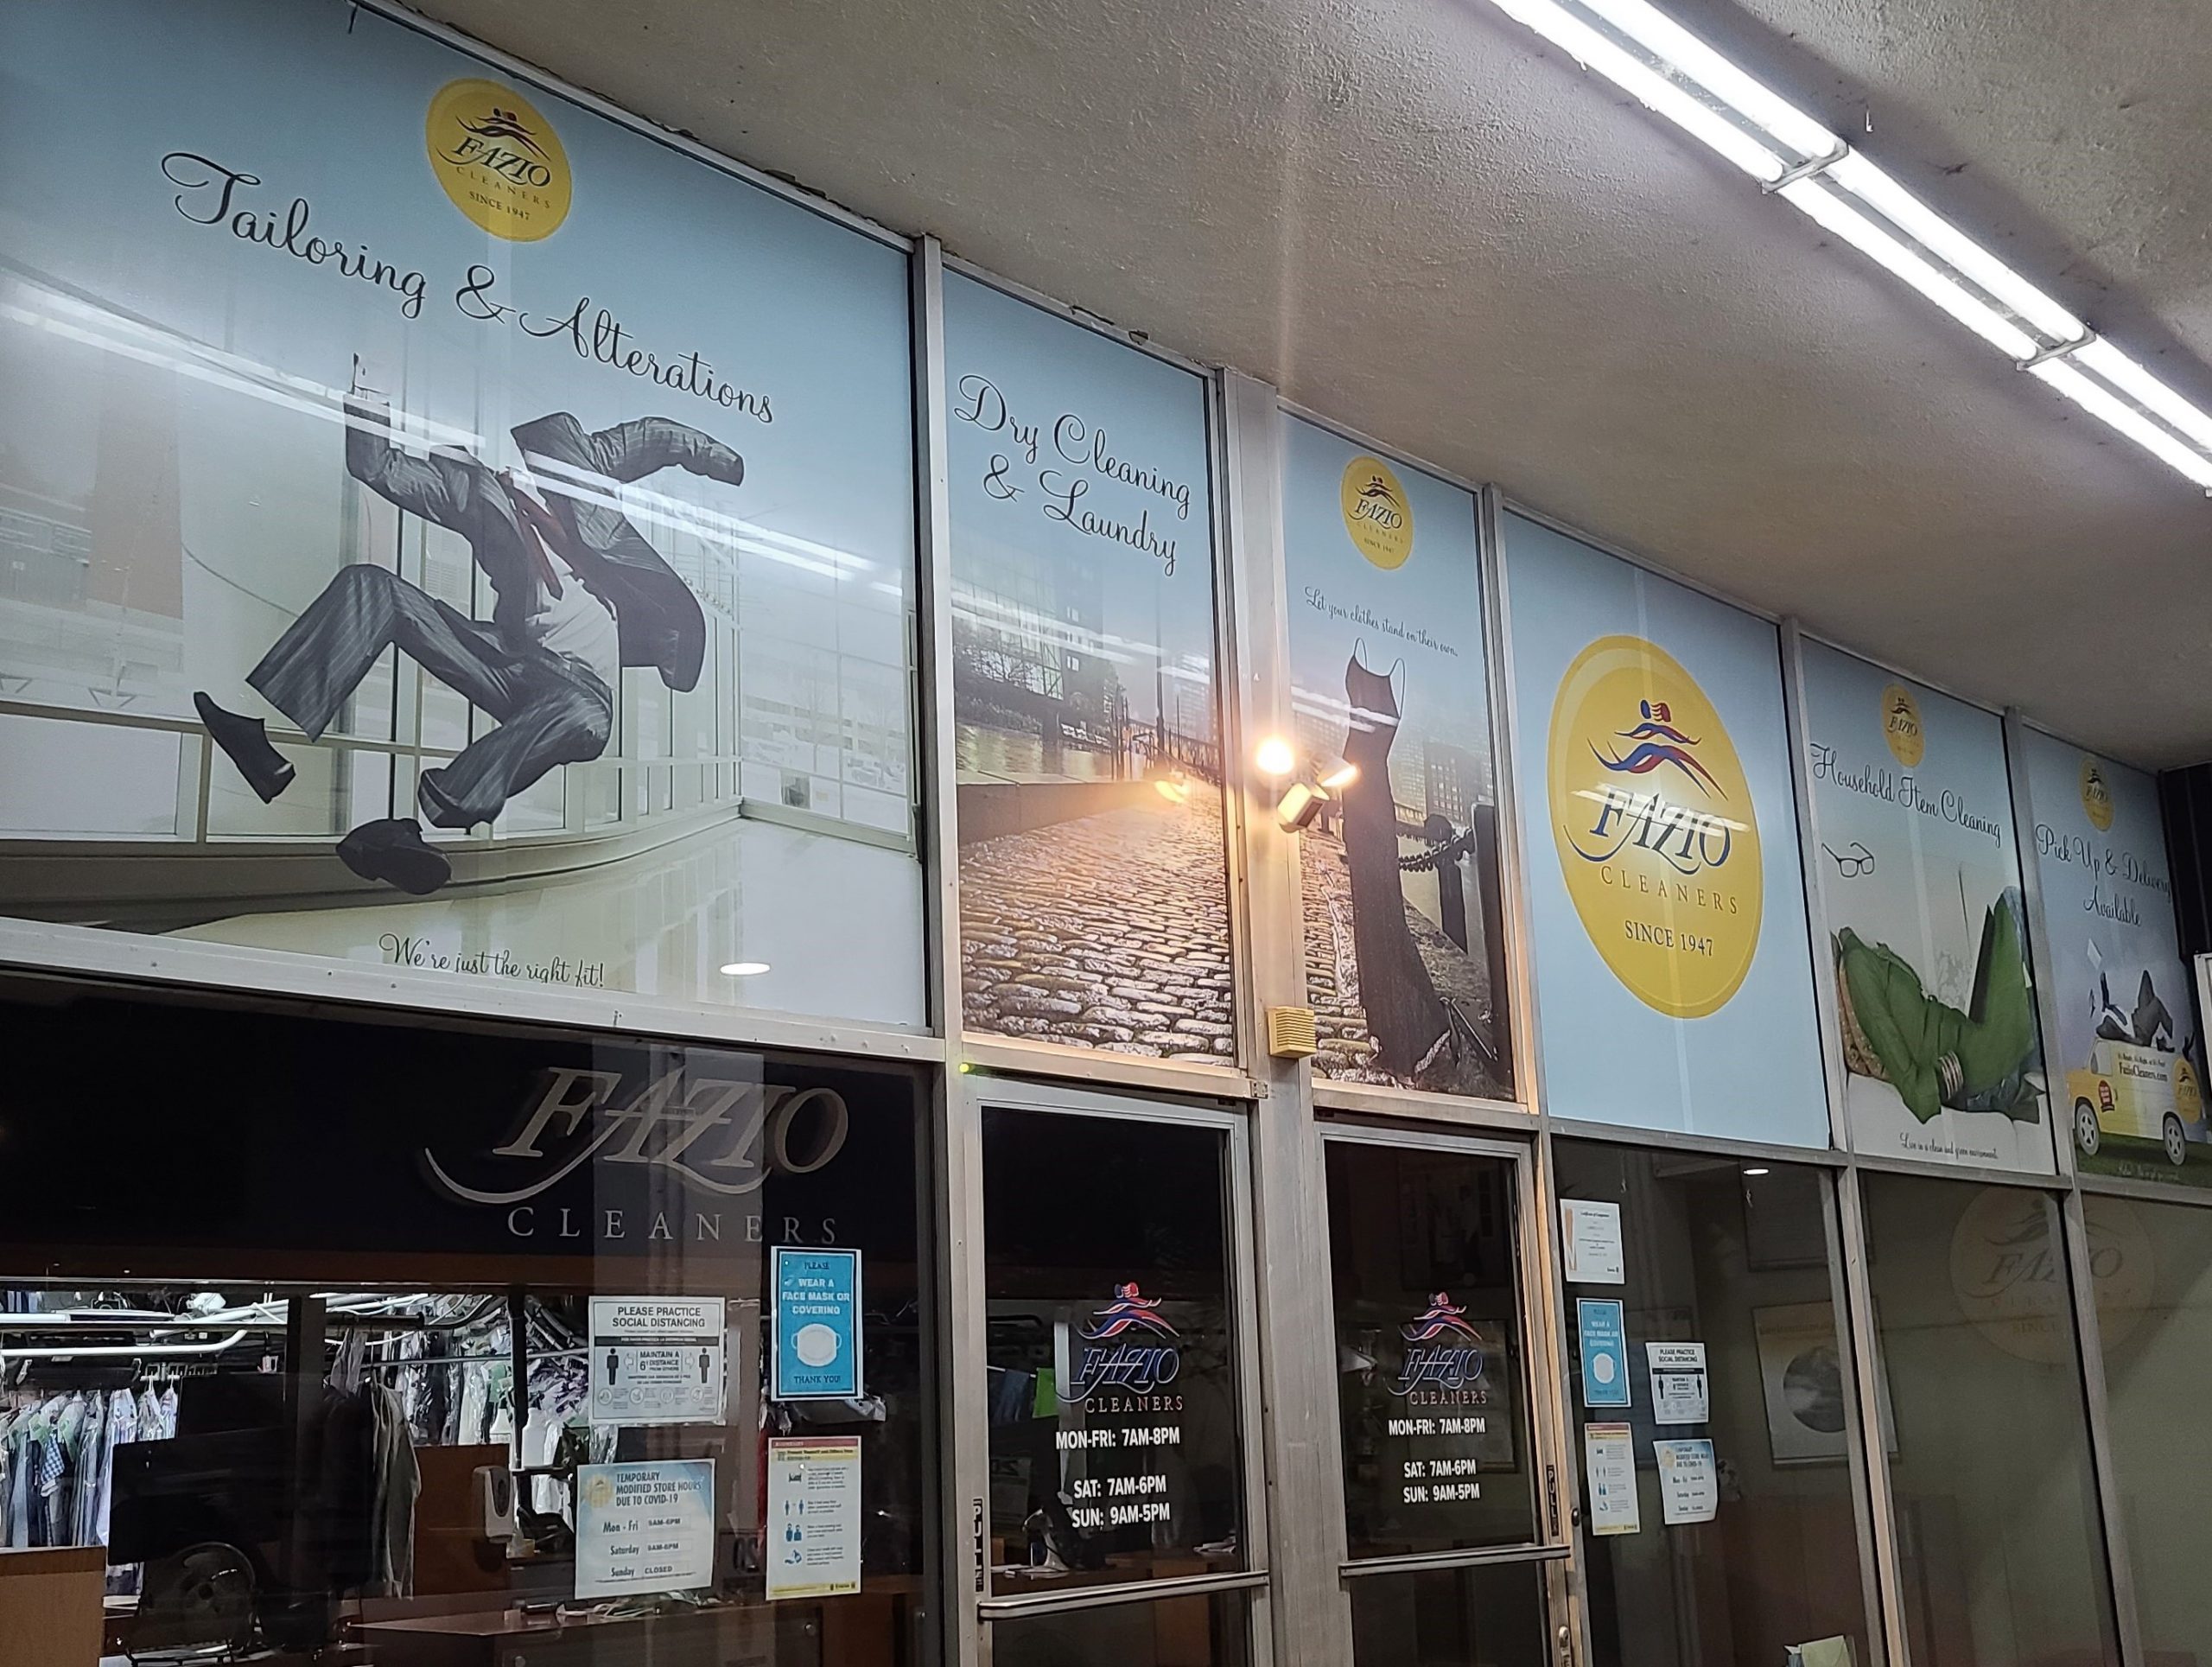 These eye-catching perforated window graphics really brighten up Fazio Cleaners' Los Angeles storefront while advertising their services at the same time.